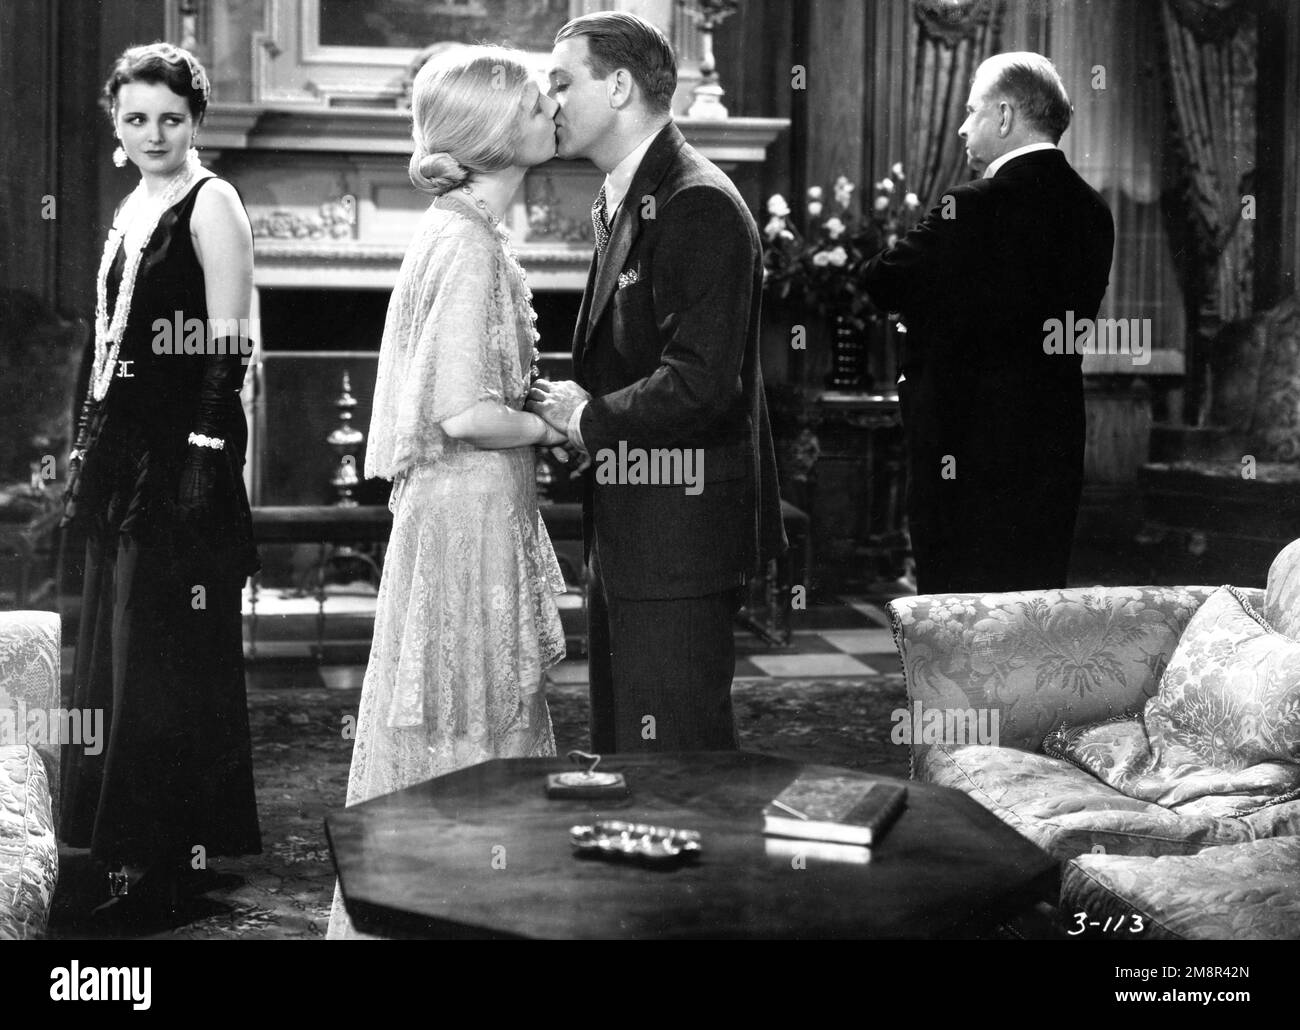 MARY ASTOR ANN HARDING ROBERT AMES and WILLIAM HOLDEN in HOLIDAY 1930 director EDWARD H. GRIFFITH play Philip Barry photoplay by Horace Jackson costumer Gwen Wakeling Pathe Exchange Stock Photo